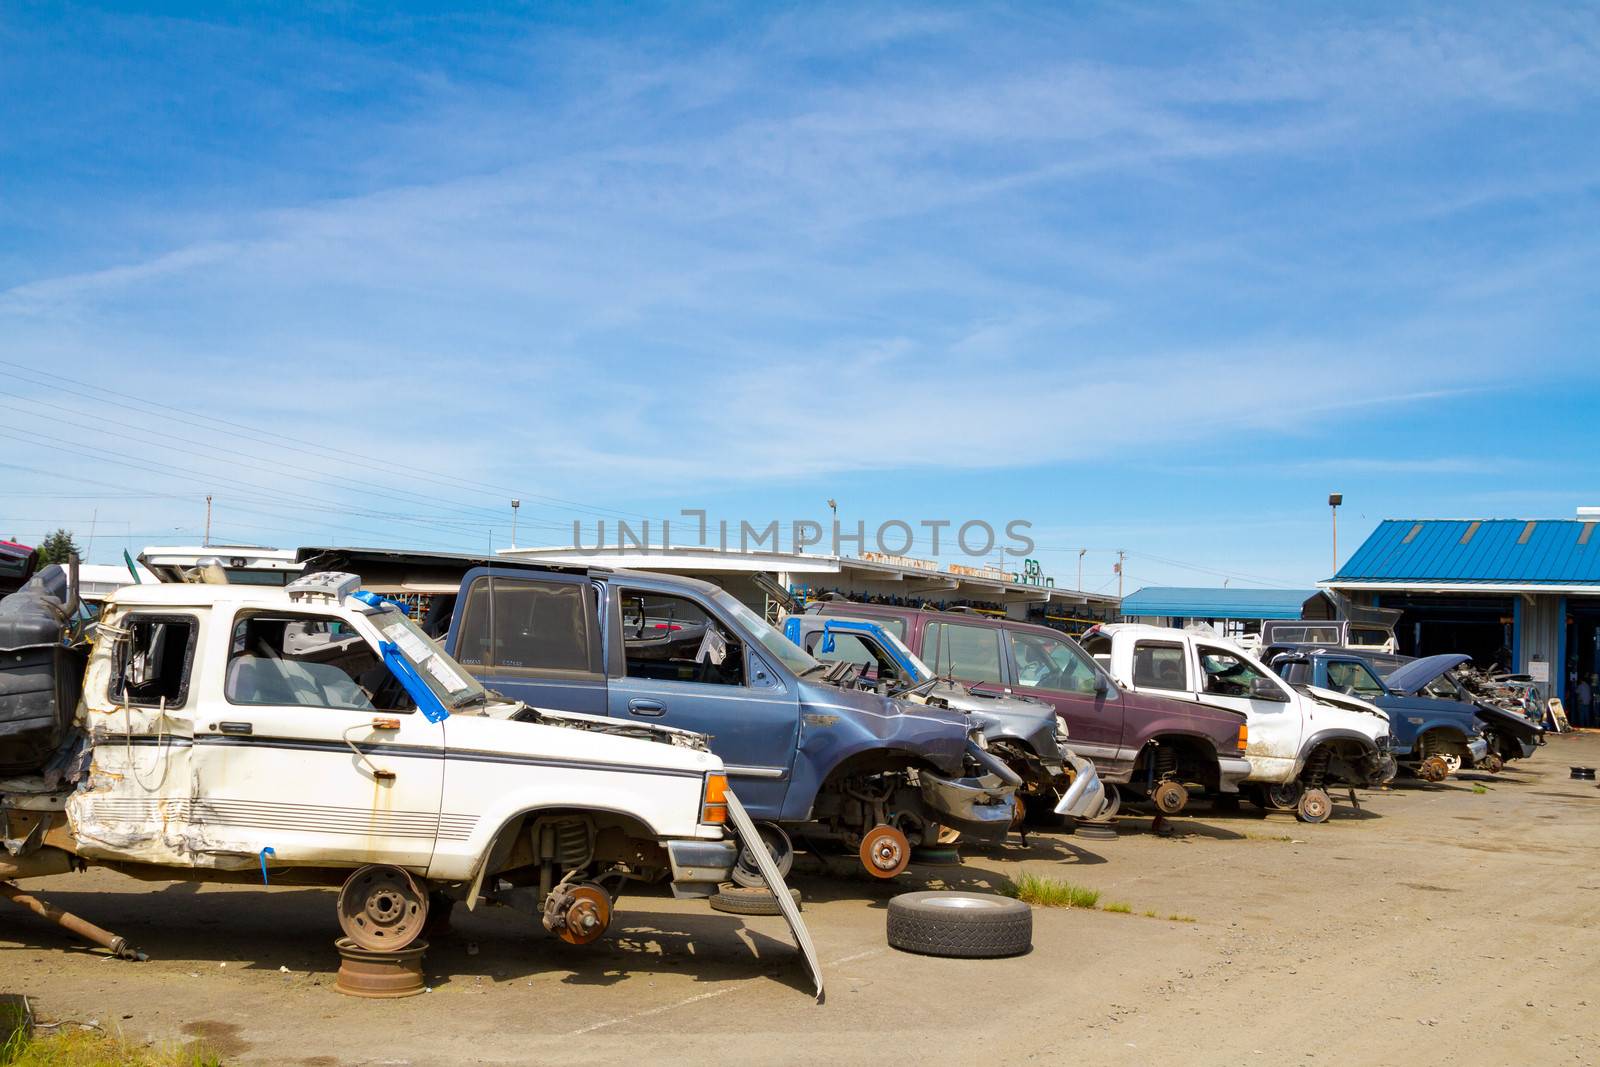 The scene shows many cars and other automobiles in a salvage junk yard where customers can pick and choose part for their vehicle repairs.